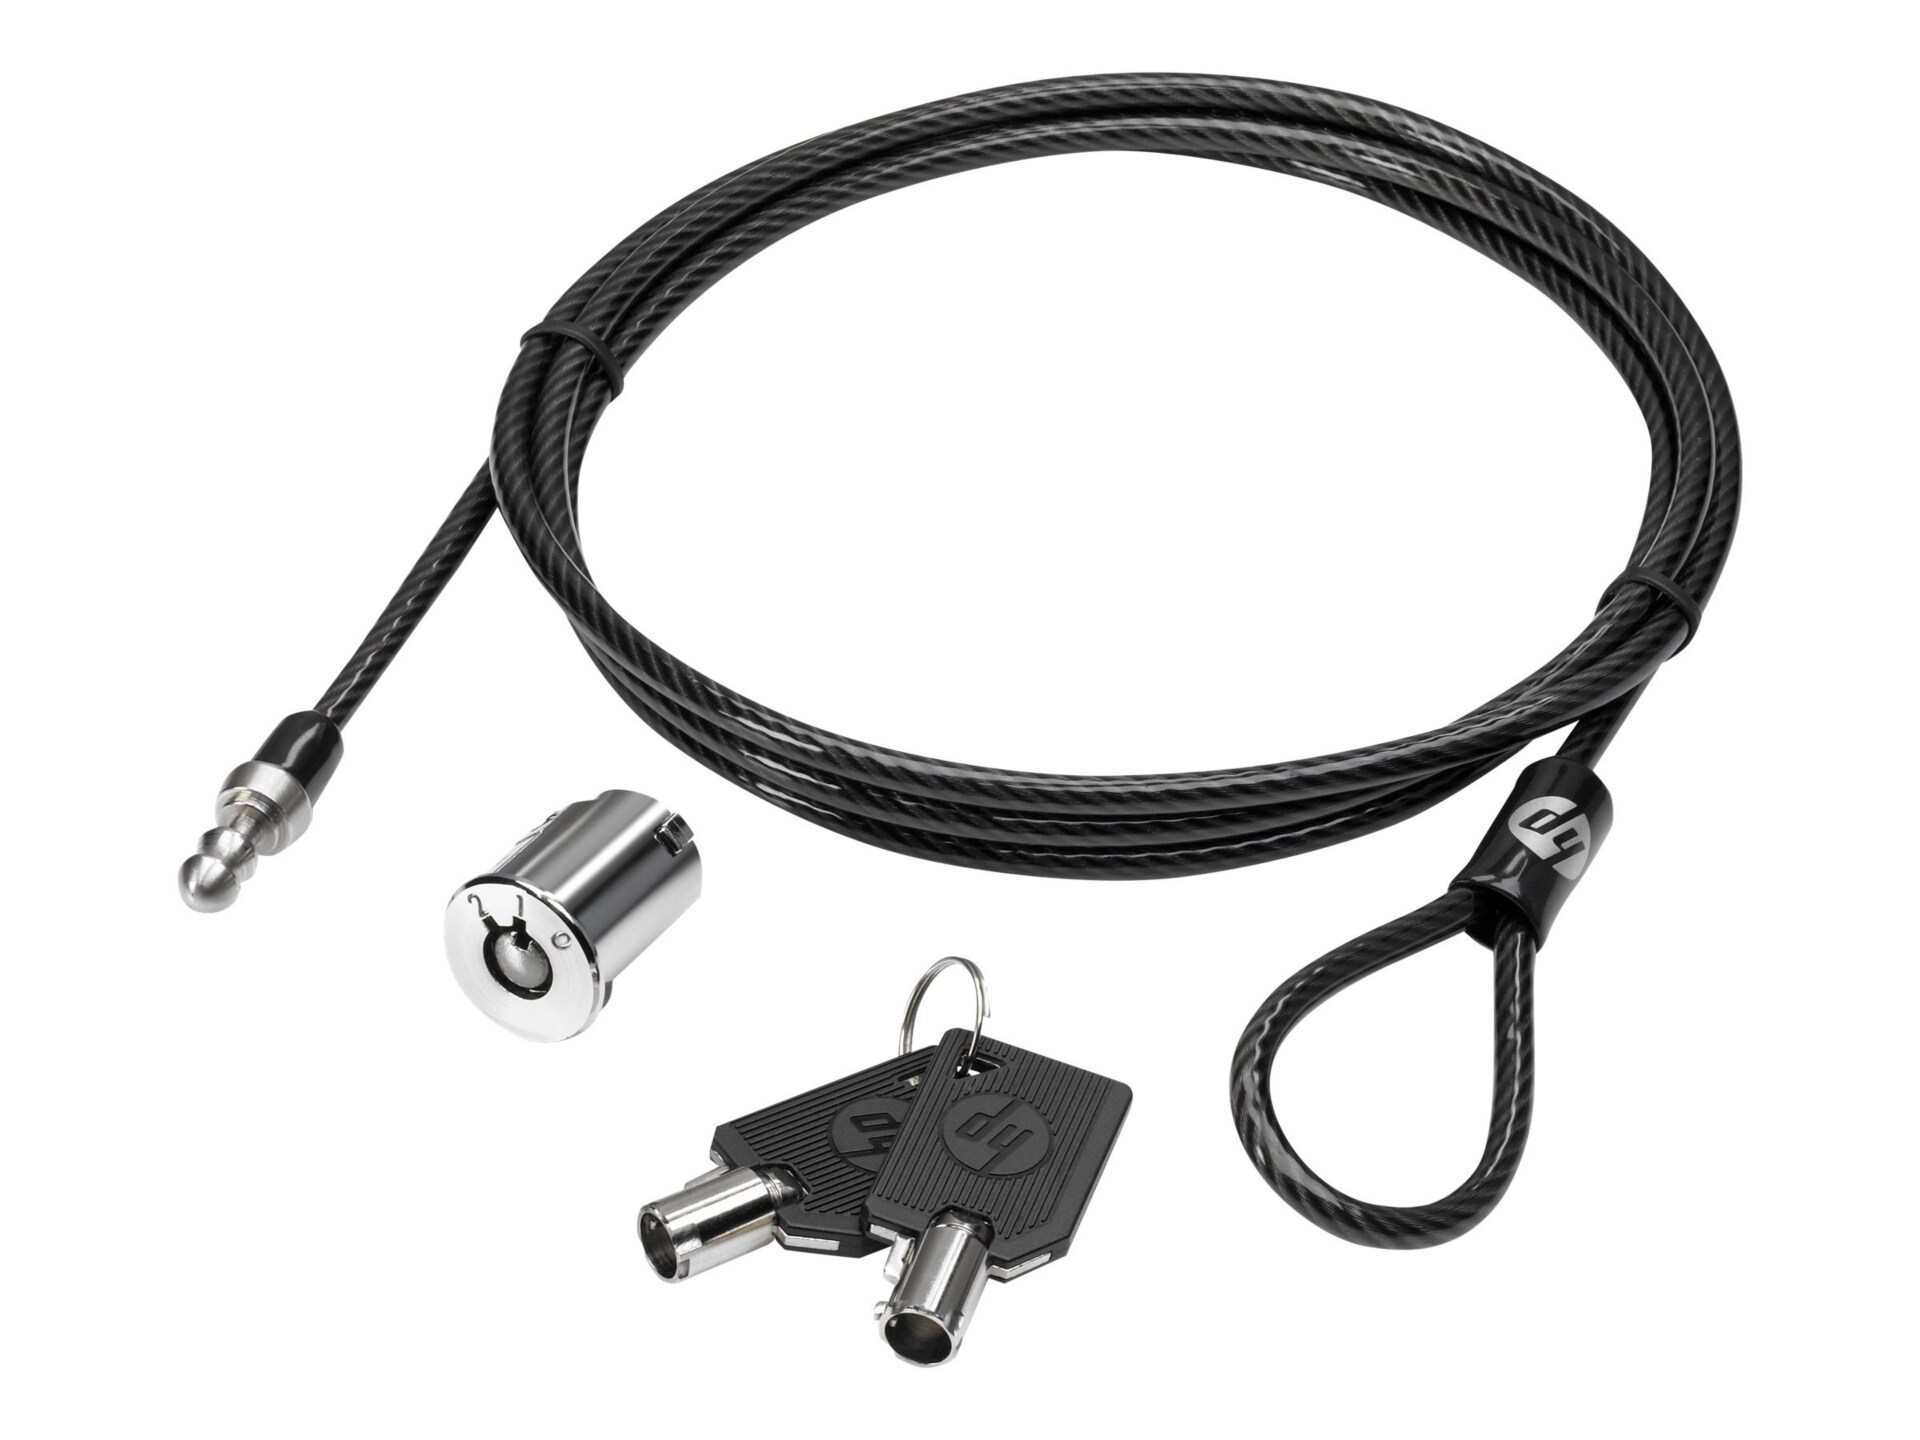 HP Docking Station Security Cable Lock